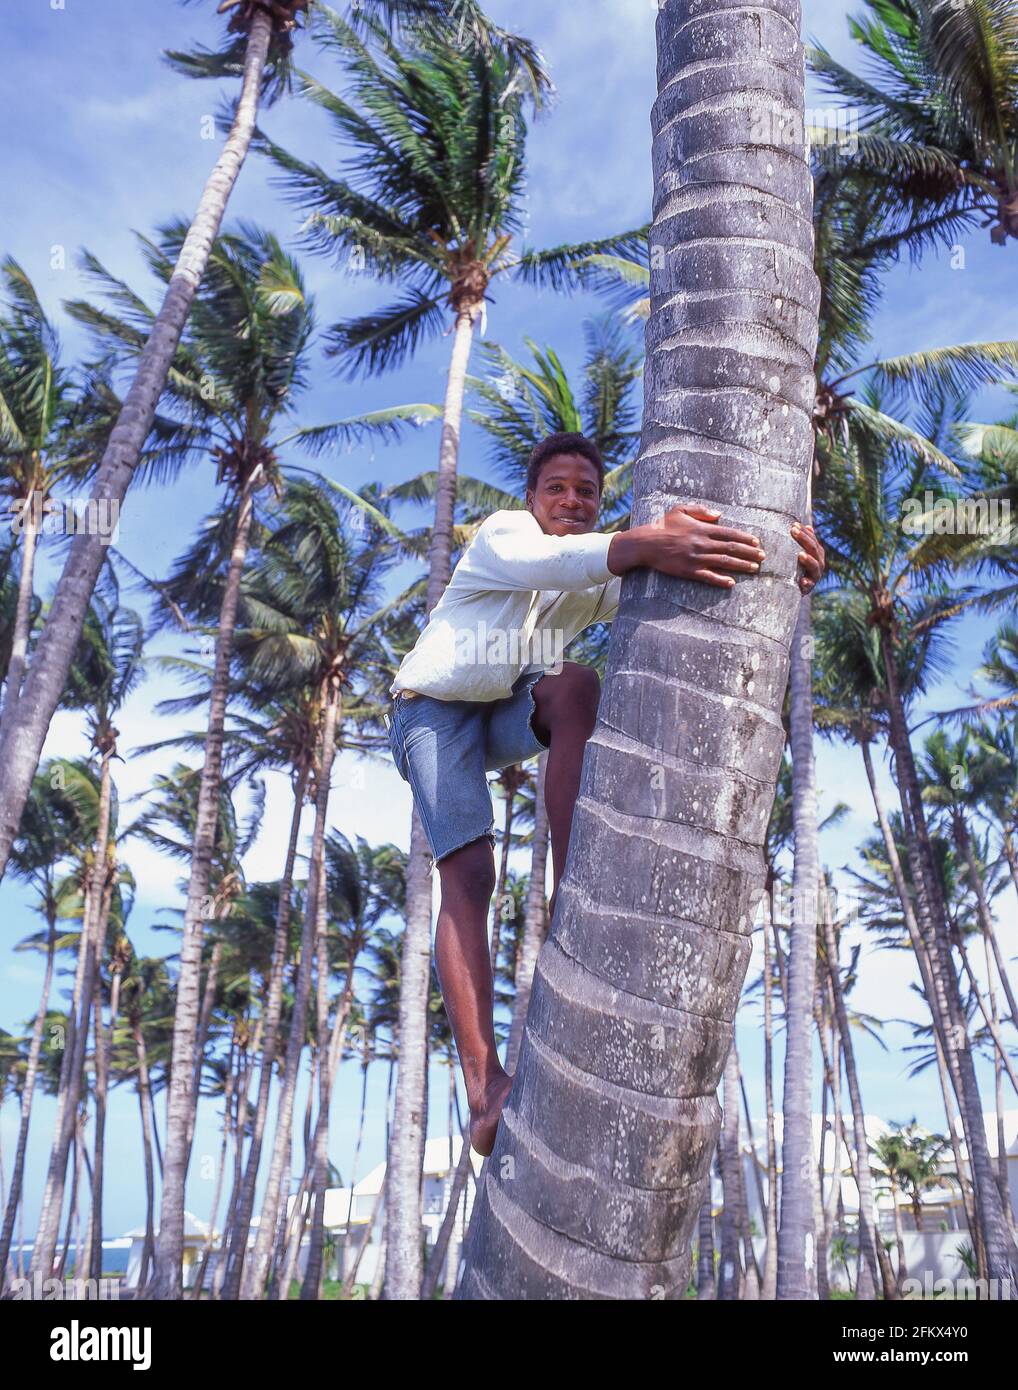 Local boy climbing coconut palm, St Kitts and Nevis, St Kitts, Lesser Antilles, Caribbean Stock Photo